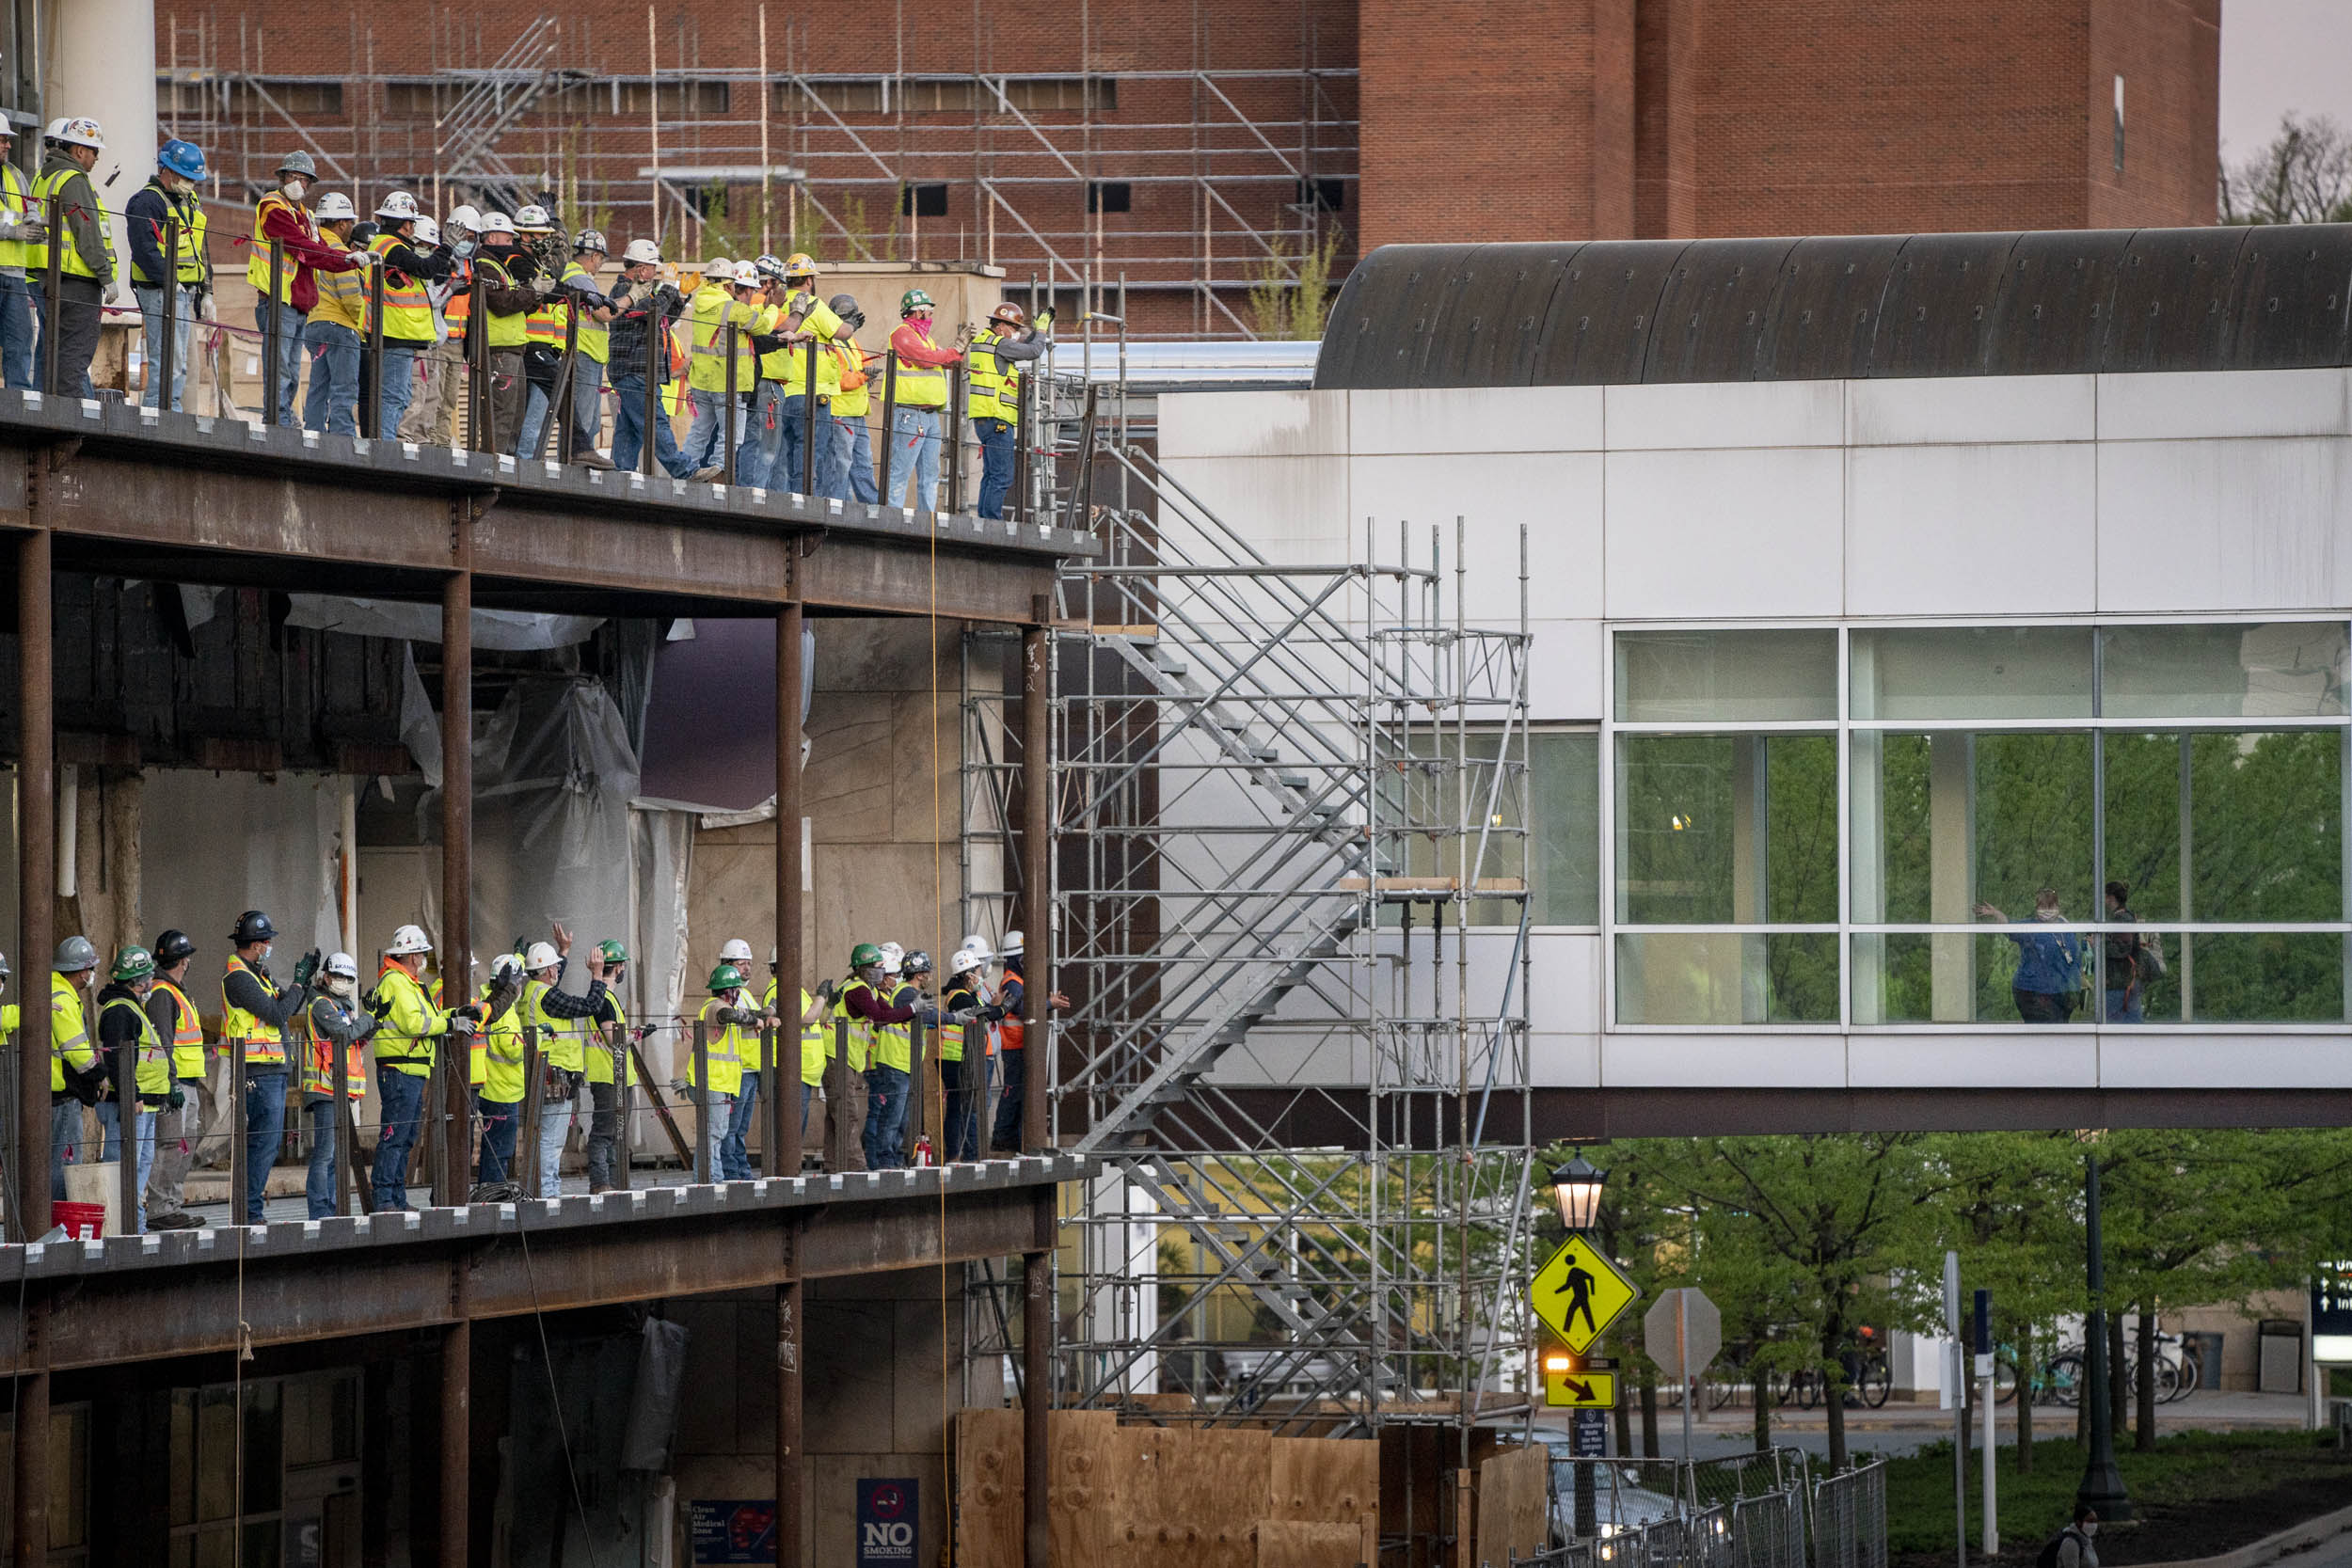 Construction workers lining the hospital construction project clapping as health care workers change shifts 